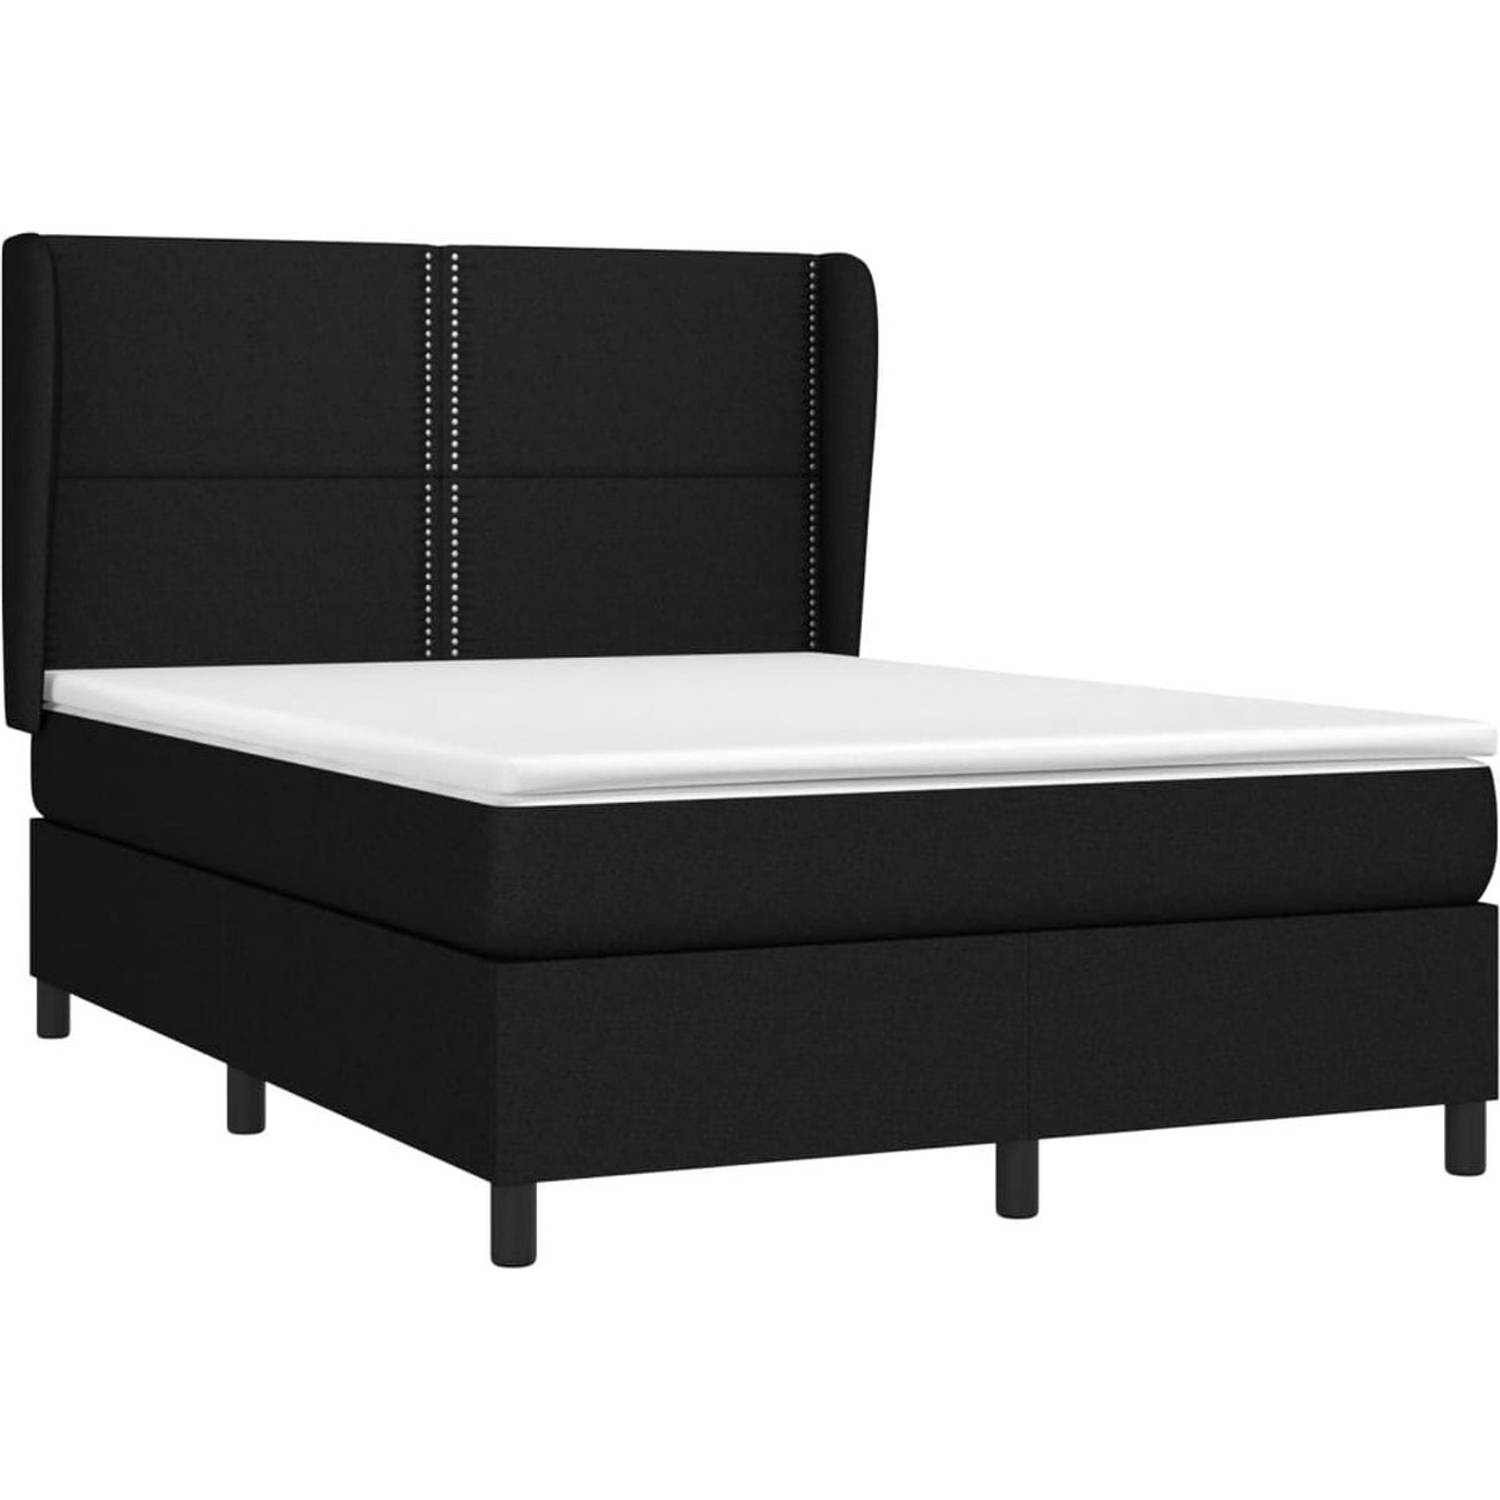 The Living Store Boxspringbed - Comfort - Bed - 193 x 147 x 118/128 cm - Zwart